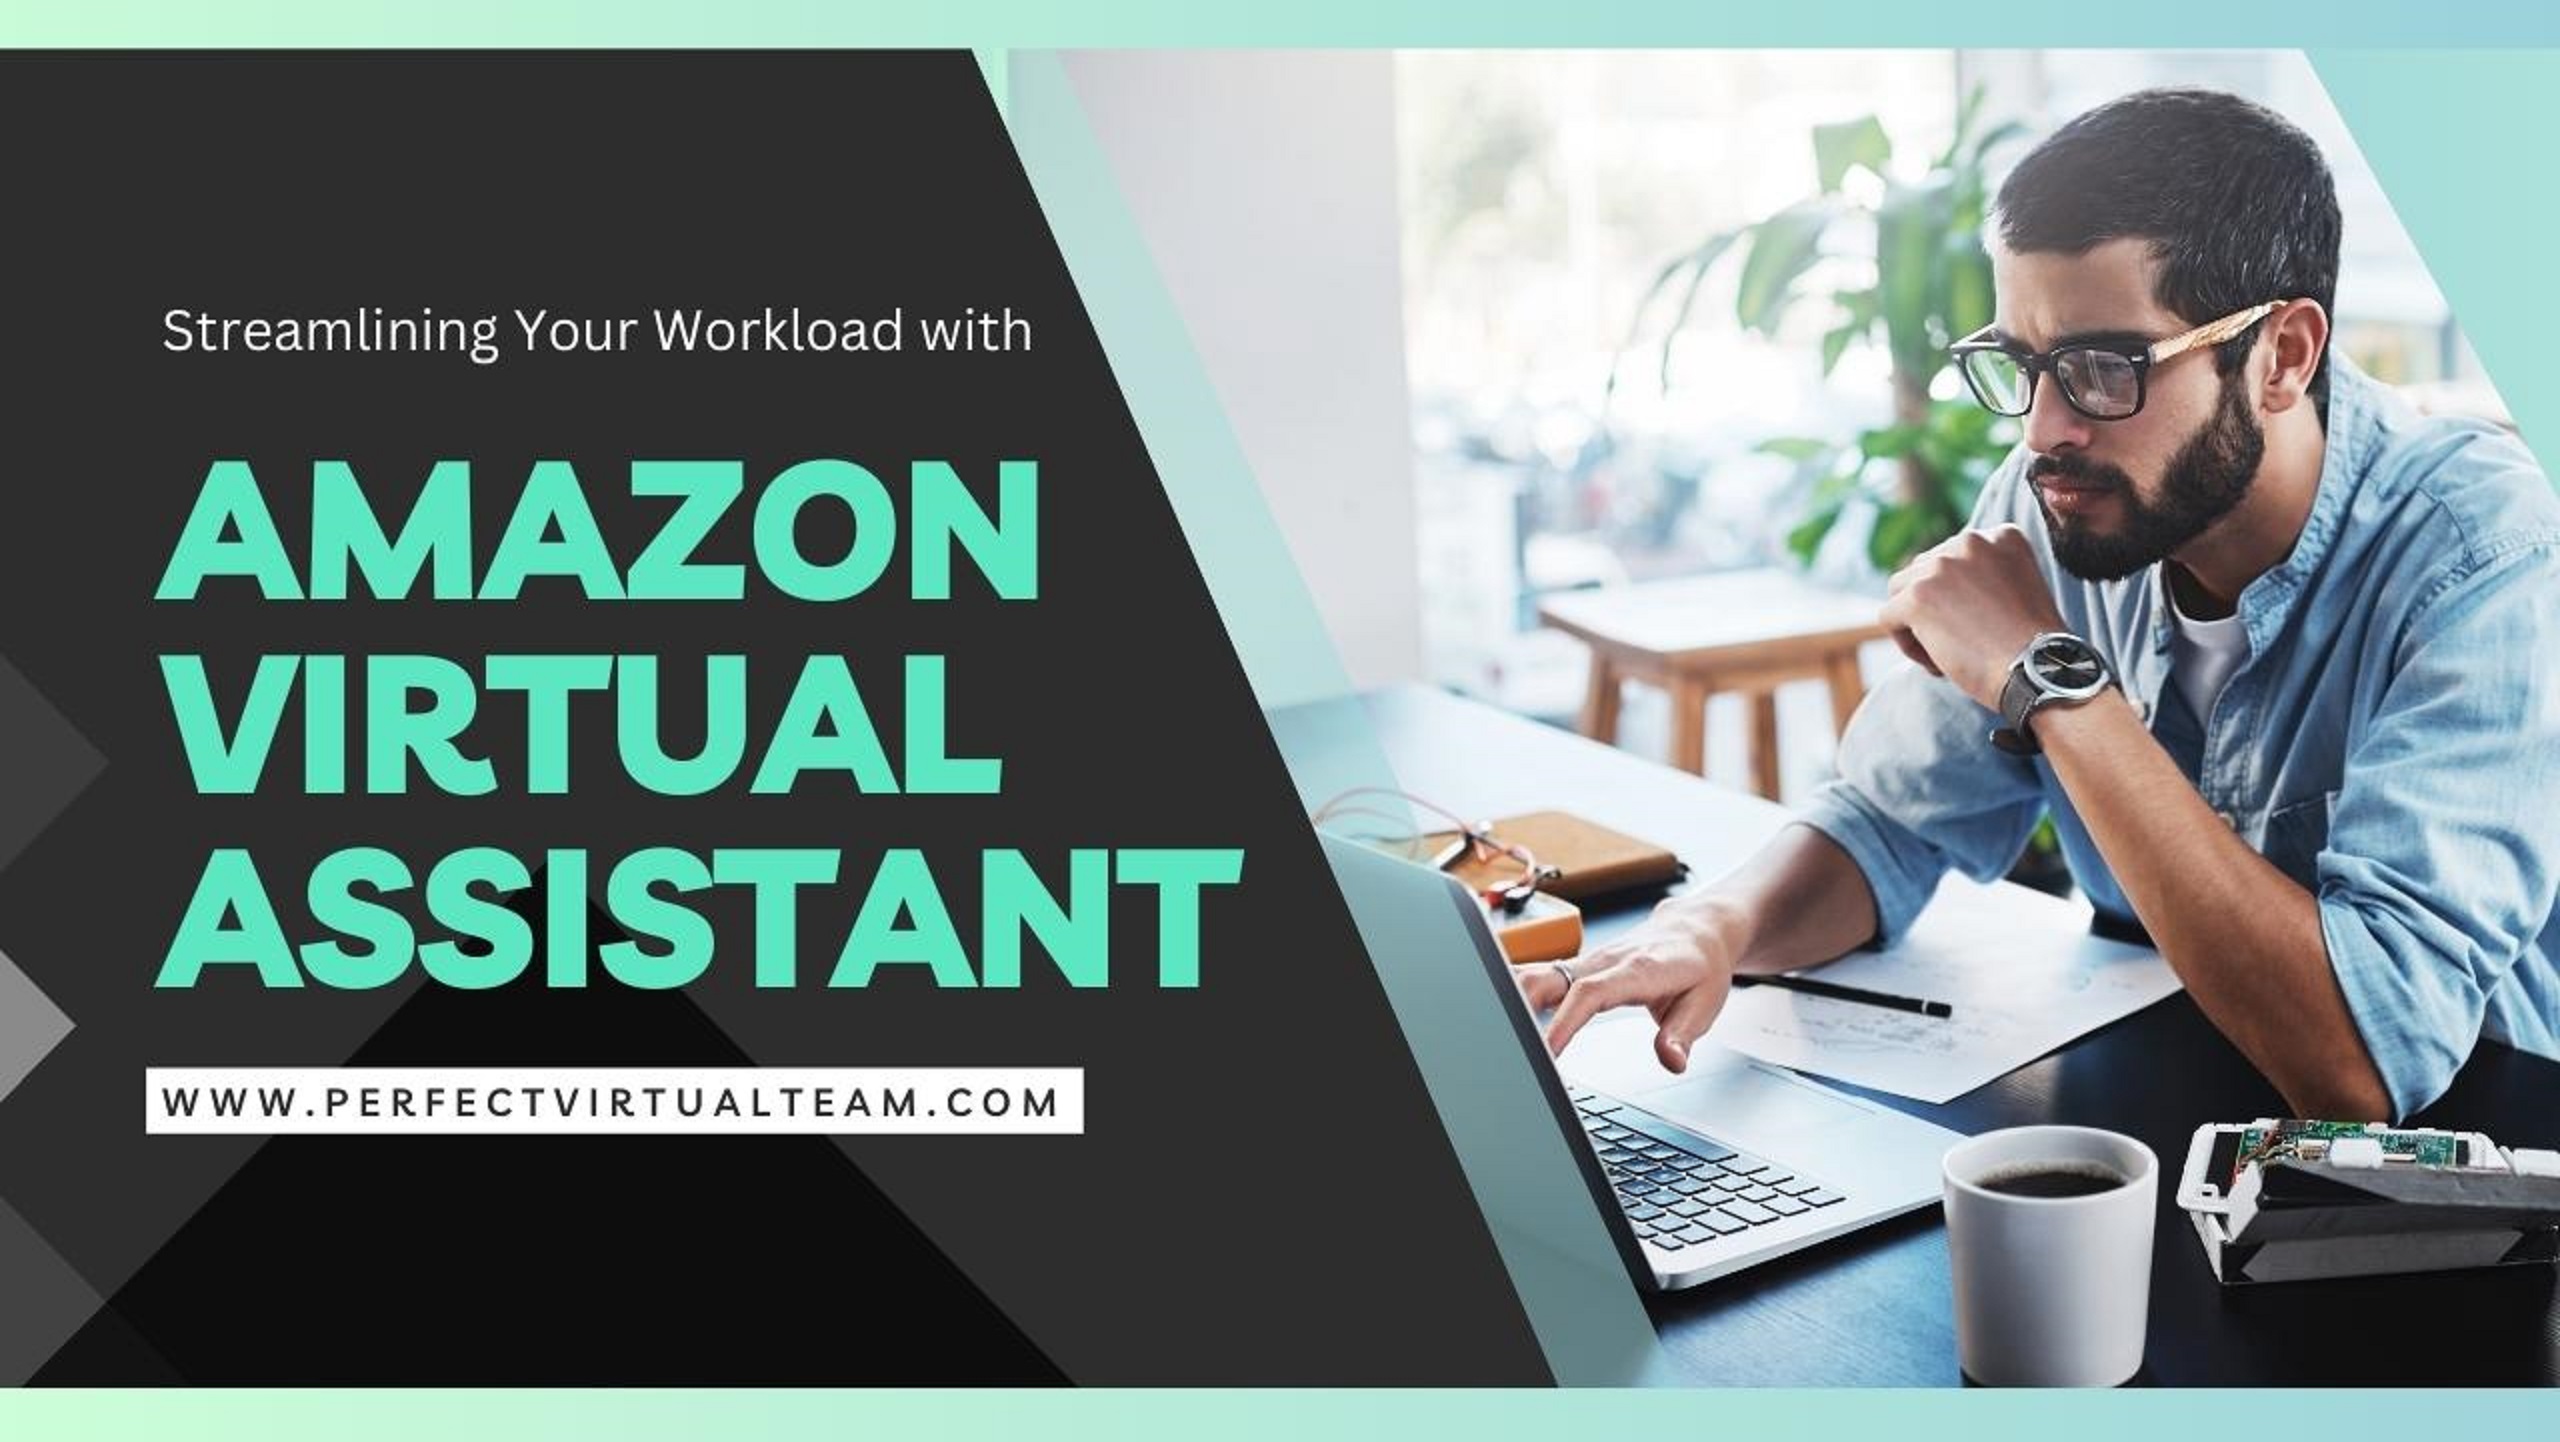 Streamlining your workload with Amazon Virtual Assistant